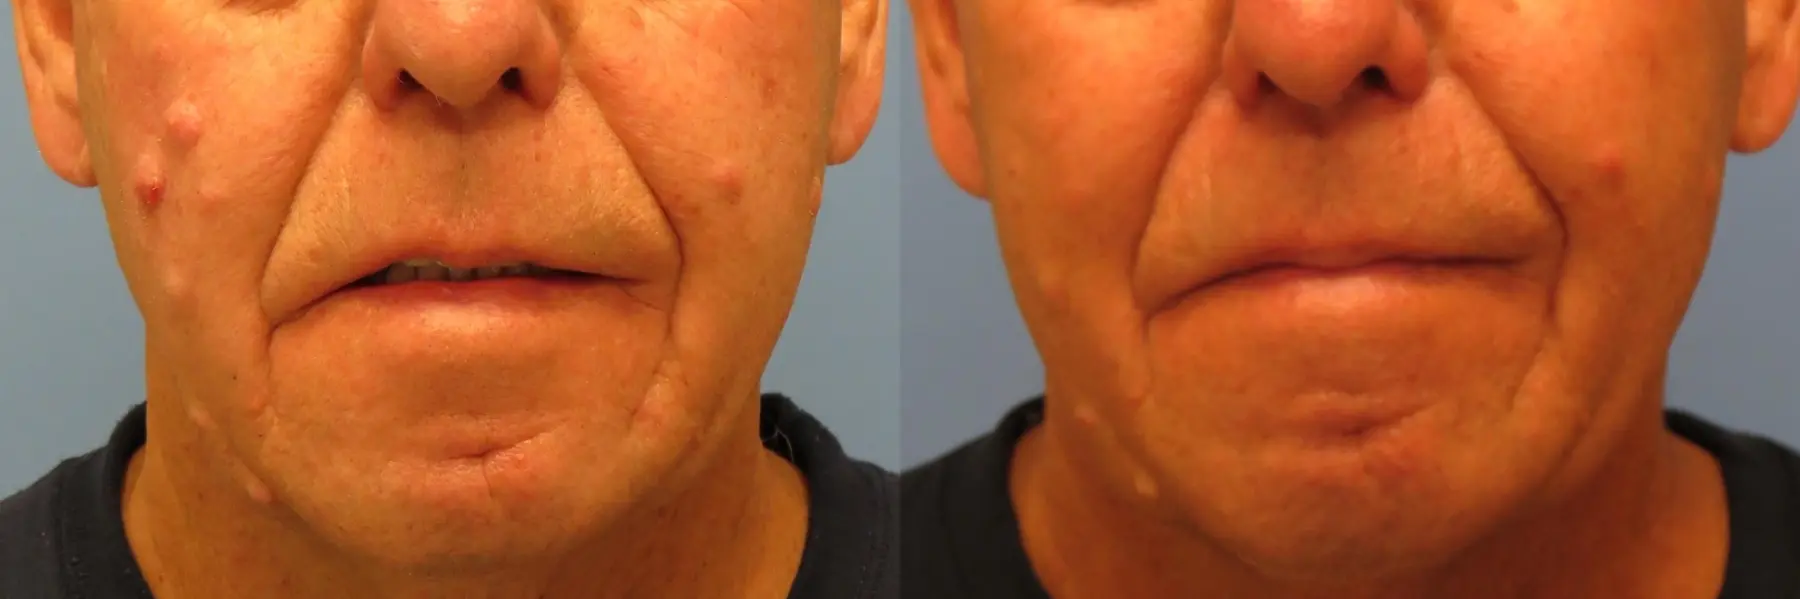 Mole Or Age Spot Removal: Patient 2 - Before and After 1